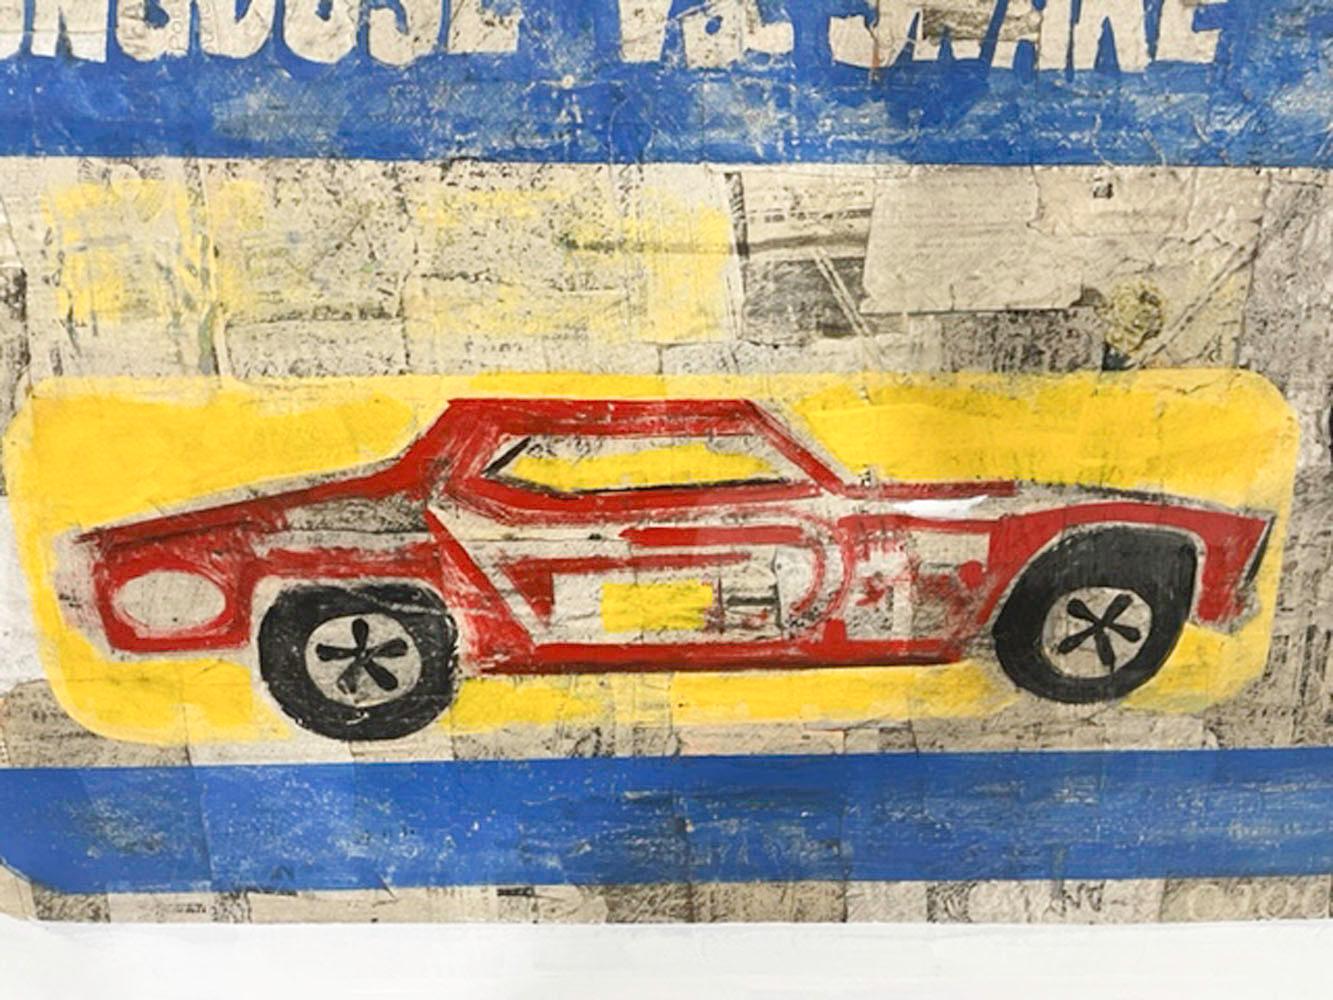 Contemporary Pop Art 'Hot Wheels, Mongoose vs. Snake' Oil & Paper on Canvas In New Condition For Sale In Nantucket, MA